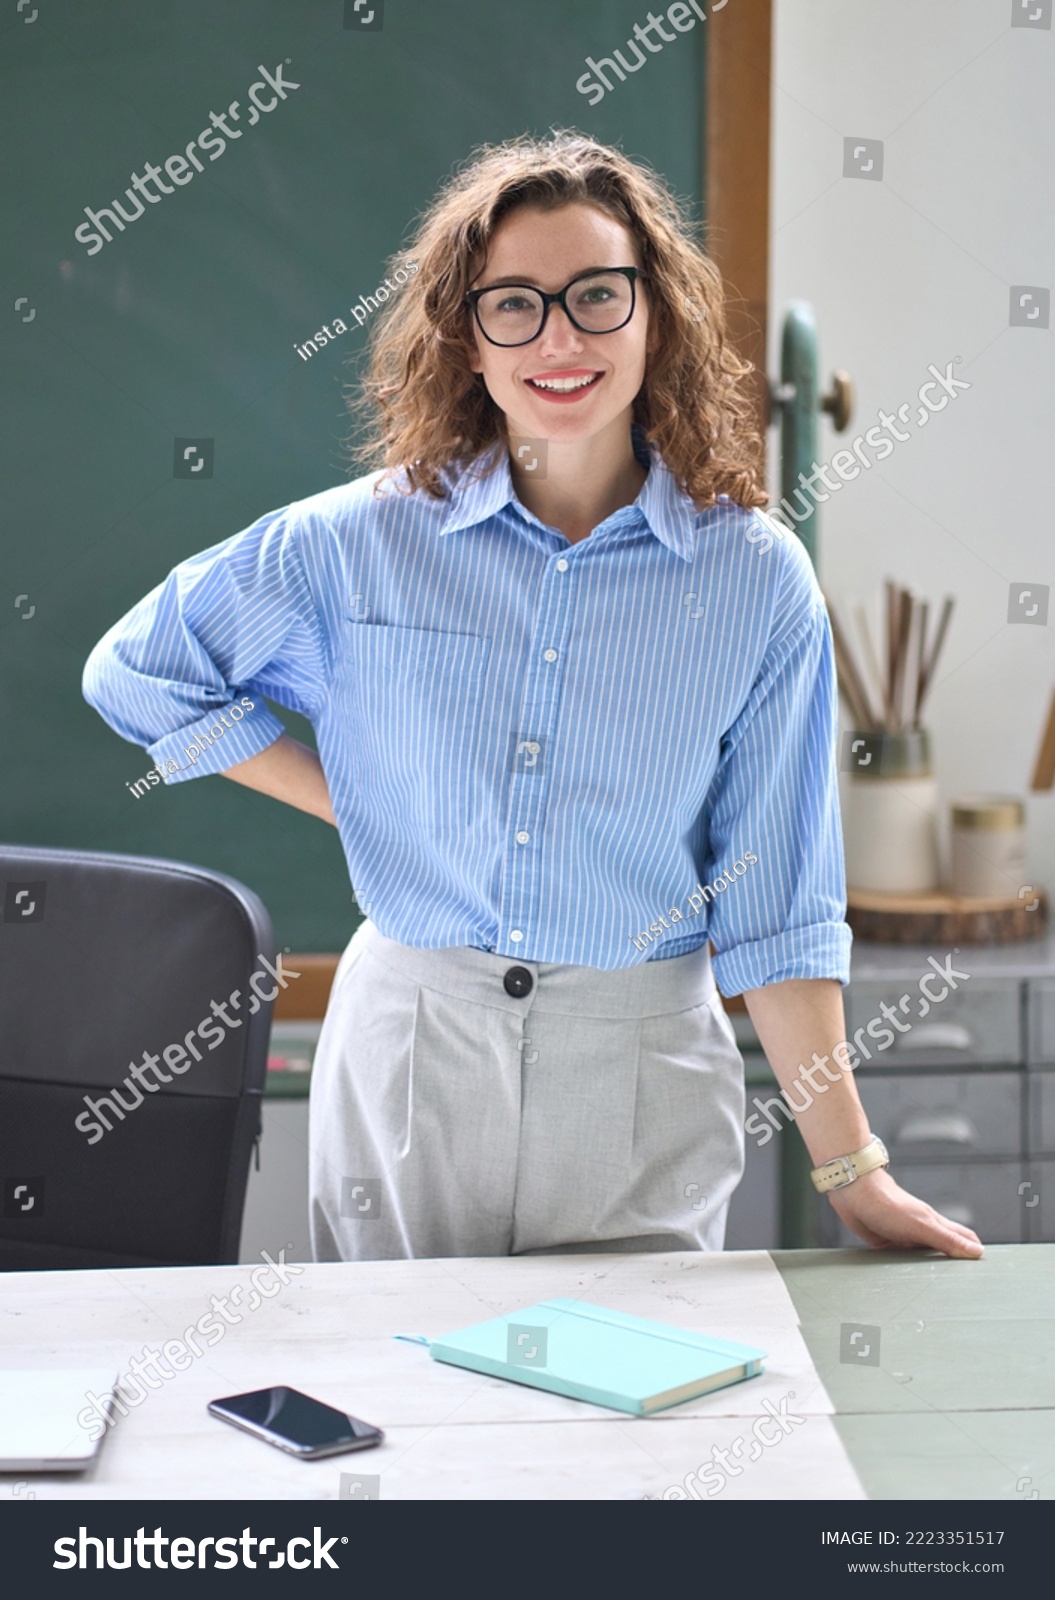 Young happy woman school professional teacher, female instructor coach standing at desk in front of chalkboard in classroom working in office presenting business education training, vertical portrait. #2223351517